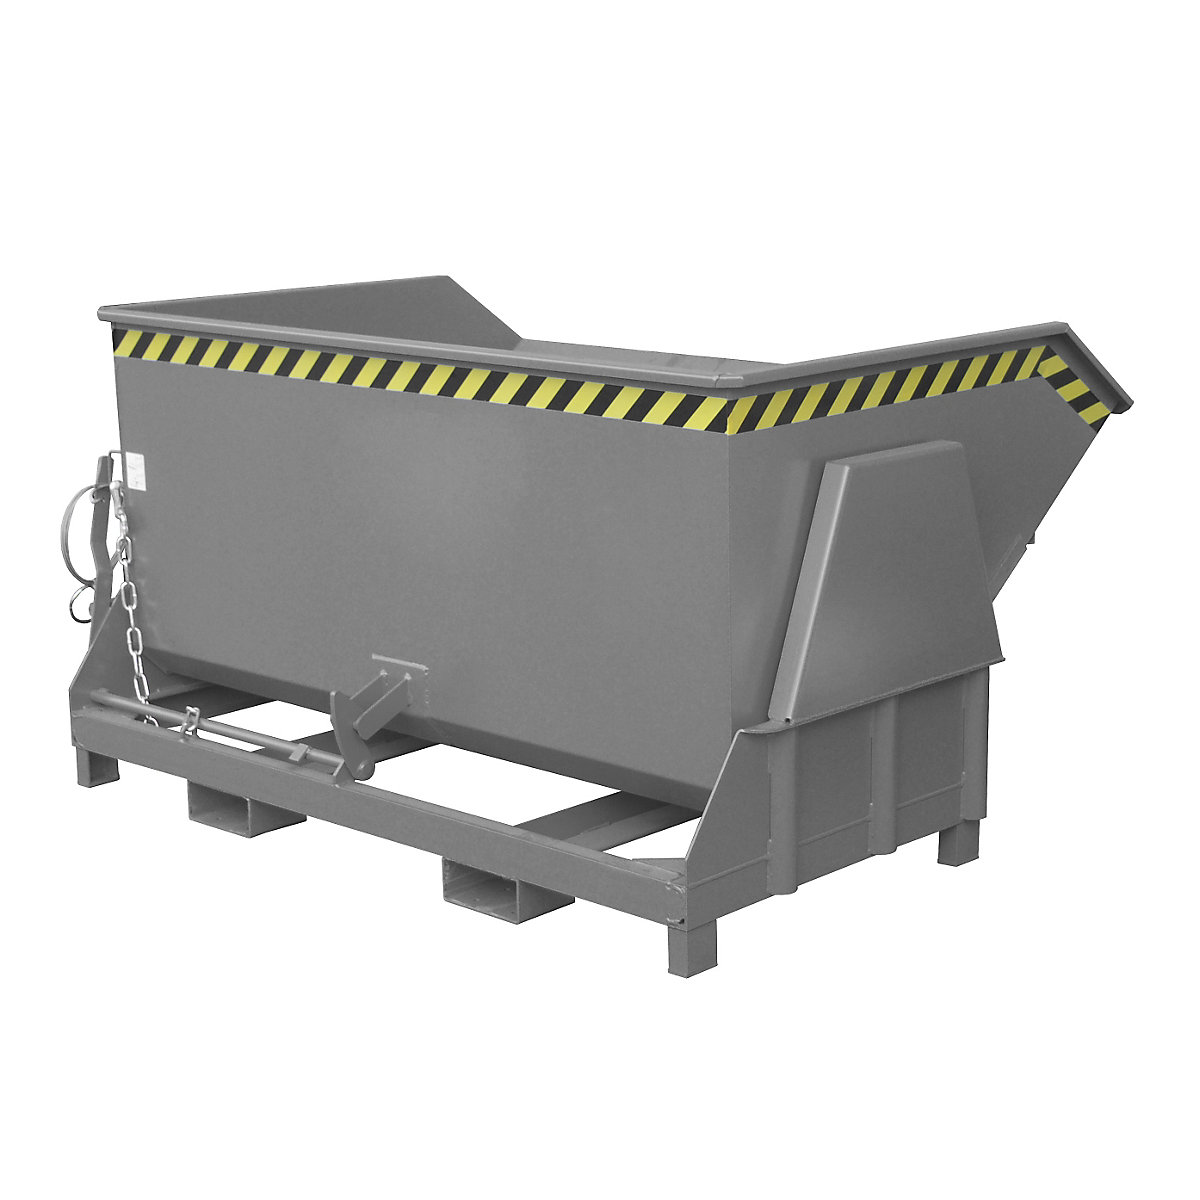 Tilting skip, standard overall height, without wheels – eurokraft pro, capacity 1.5 m³, painted grey RAL 7005-7